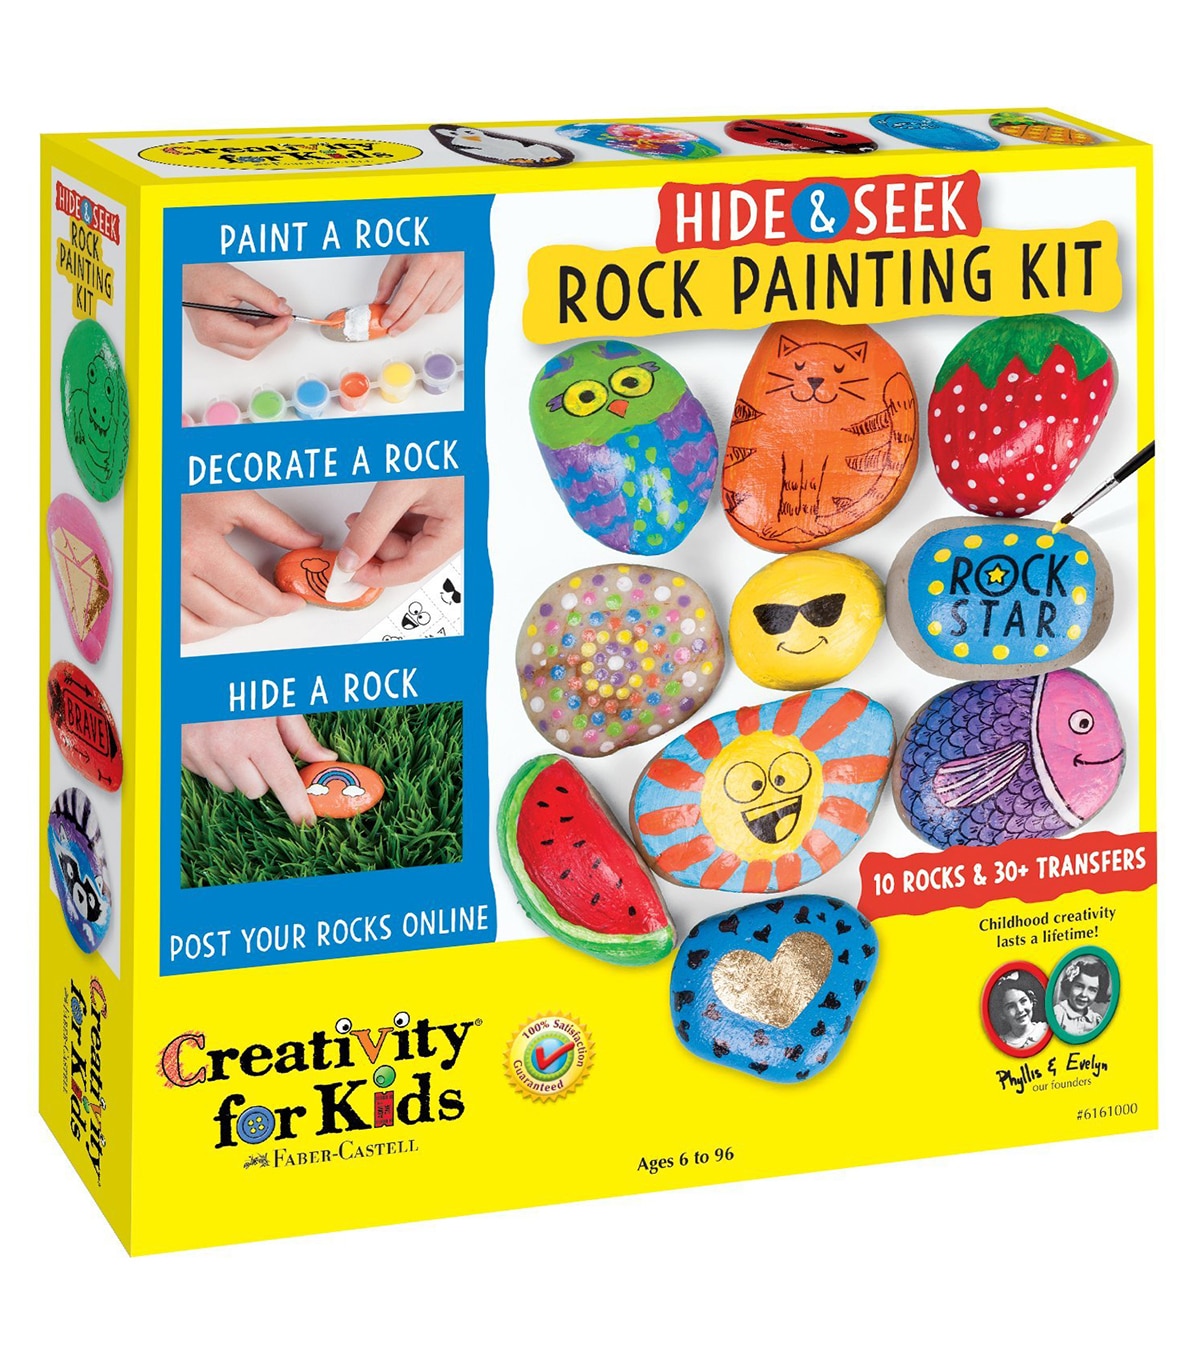 craft kits for 12 year olds